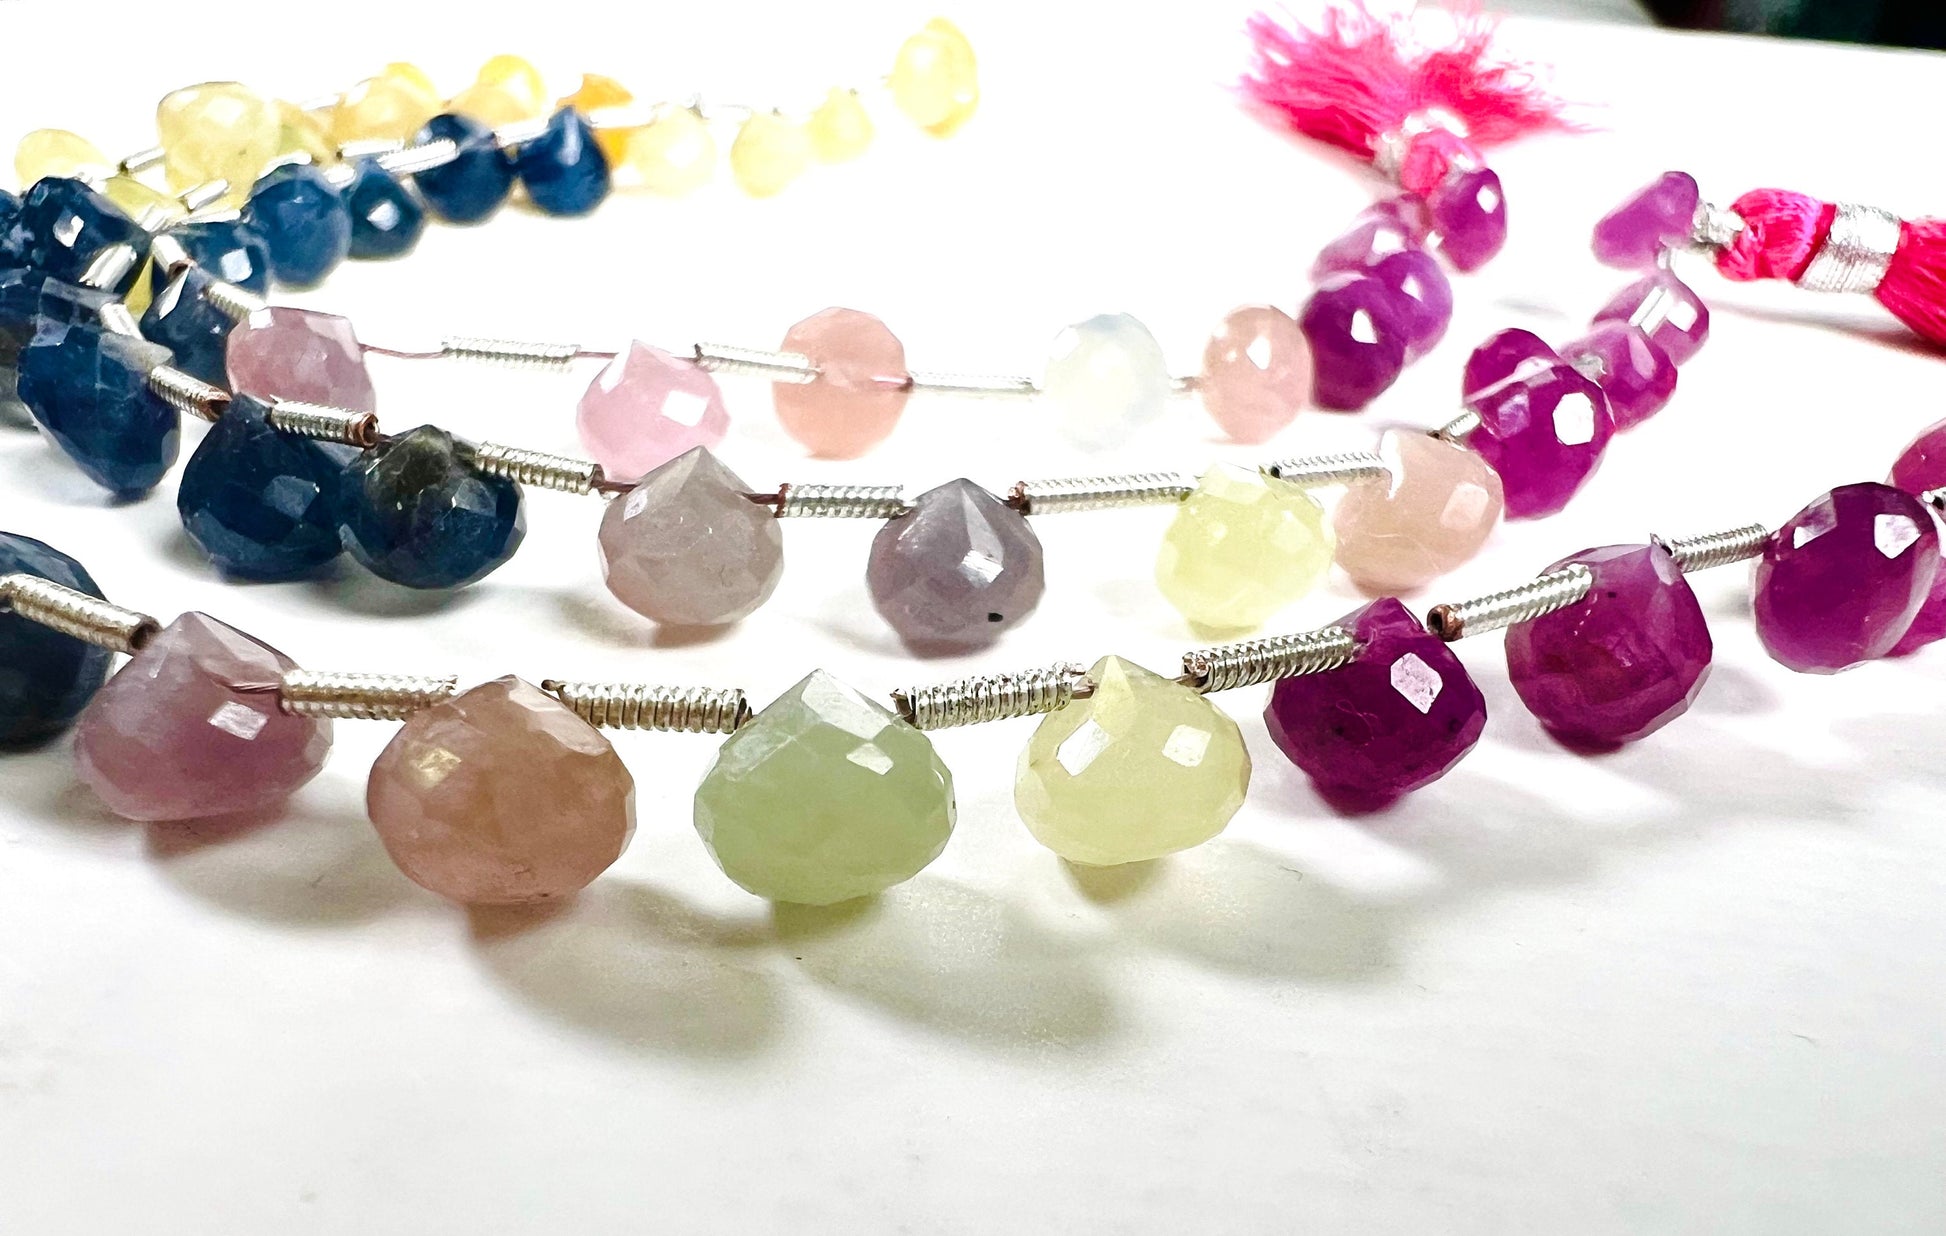 Multi Sapphire onion drop, Natural Multi Sapphire Micro Faceted Briolette 4-5, 5-6mm, 6-7mm Rare, DIY Jewelry Making Gemstone Bead, 4 Colors